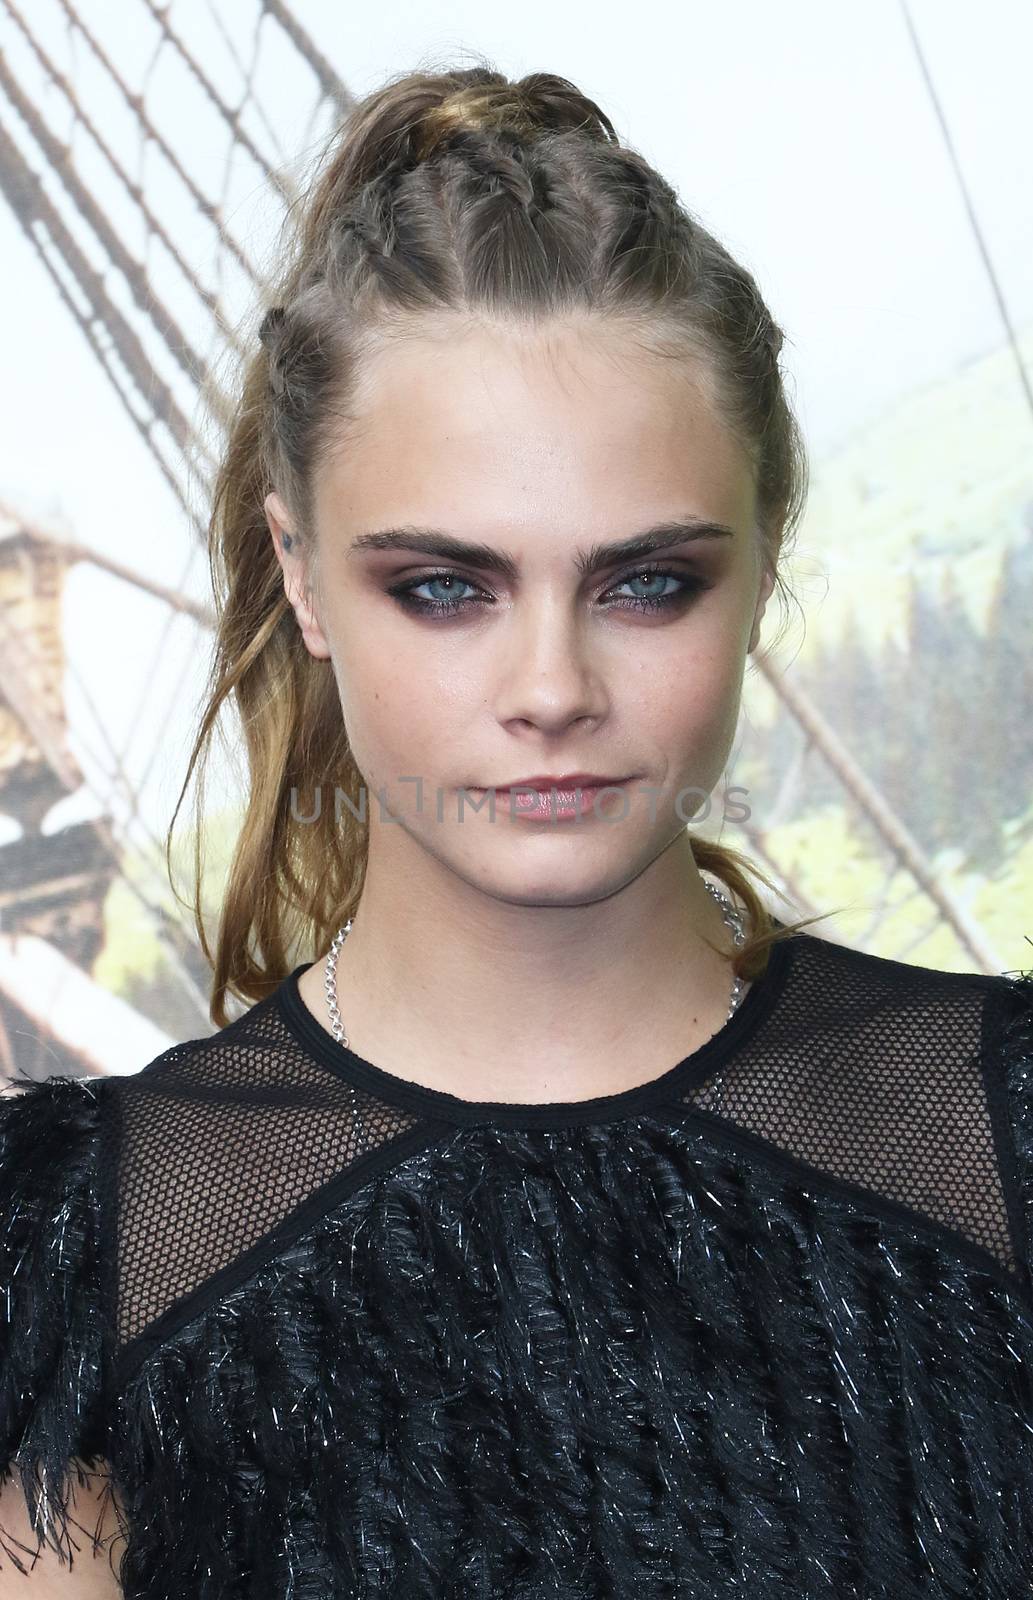 UNITED KINGDOM, London: Cara Delevingne was among the stars to hit the red carpet in London for Joe Wright's Pan, a prequel to J.M. Barrie's classic Peter Pan stories, on September 20, 2015.